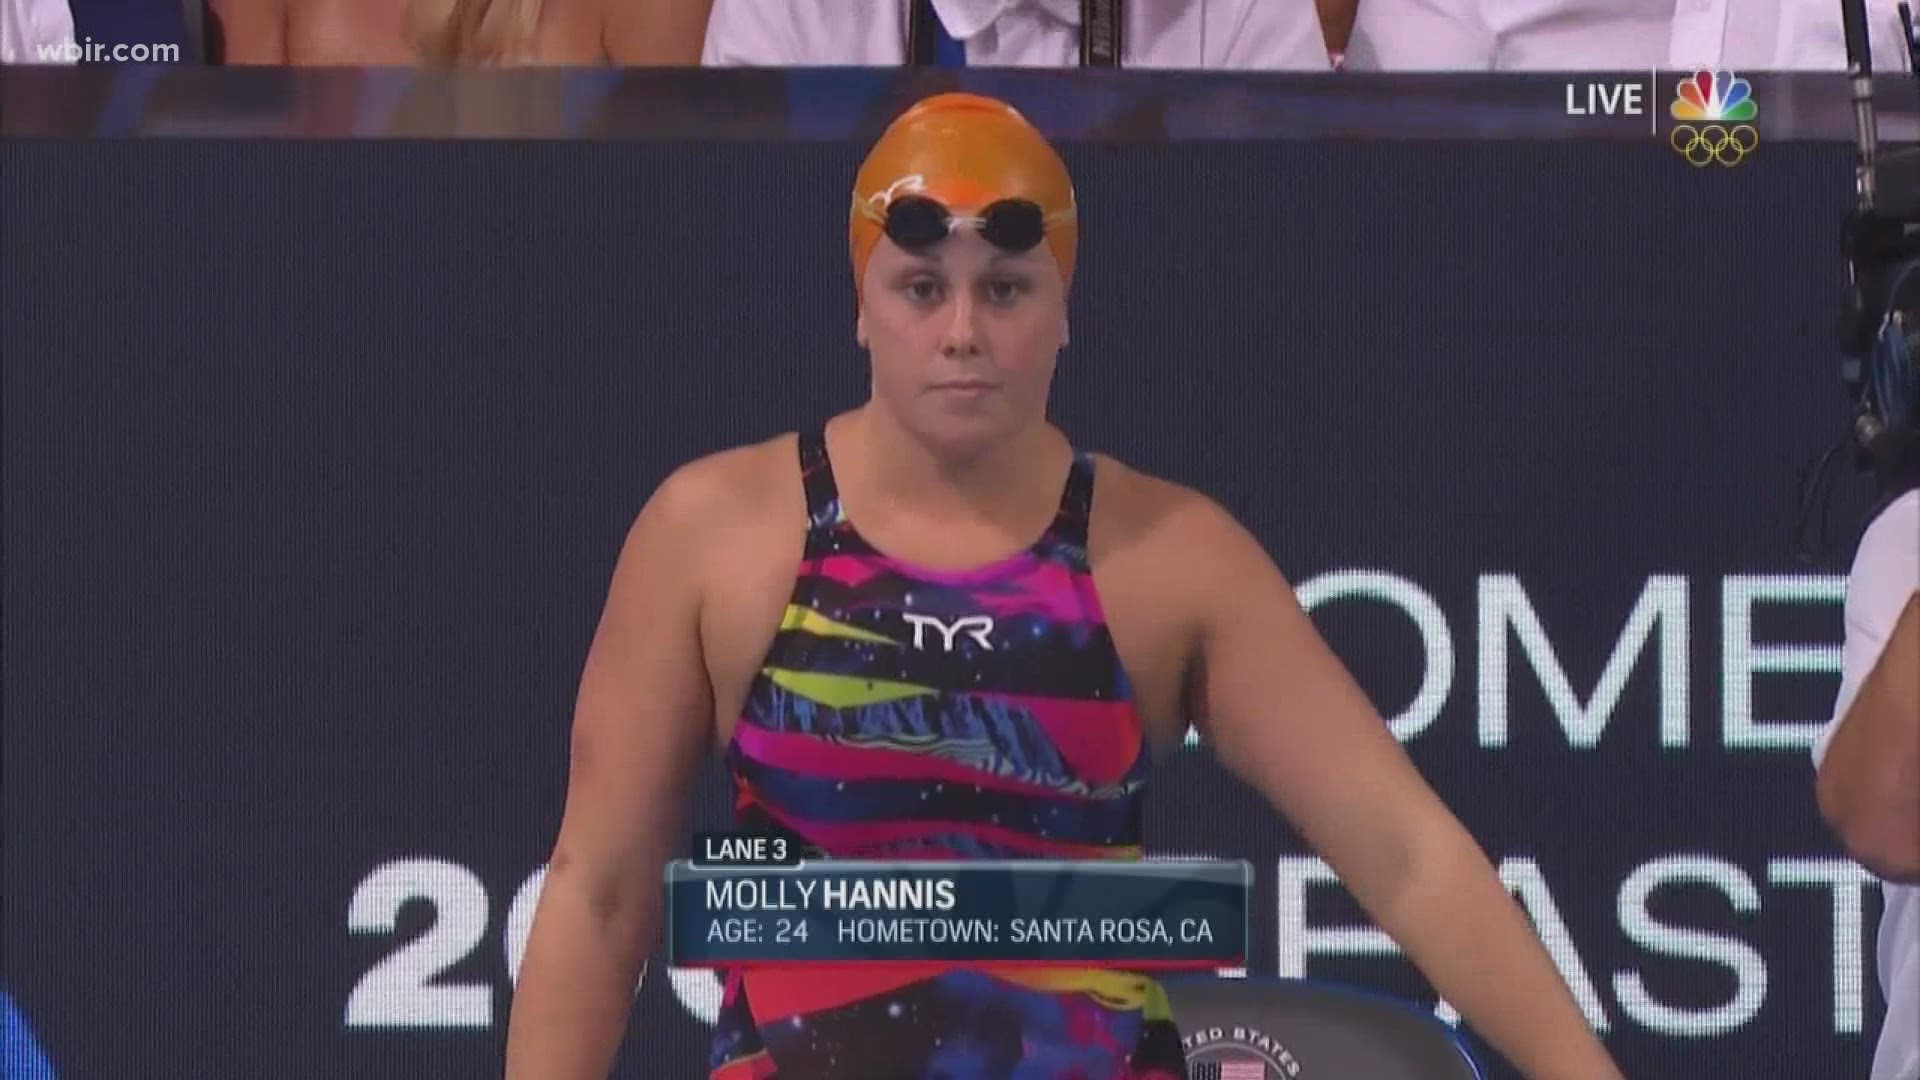 MOLLY HANNIS WILL COMPETE IN THE OLYMPIC TRIALS SEMI-FINALS ON MONDAY.